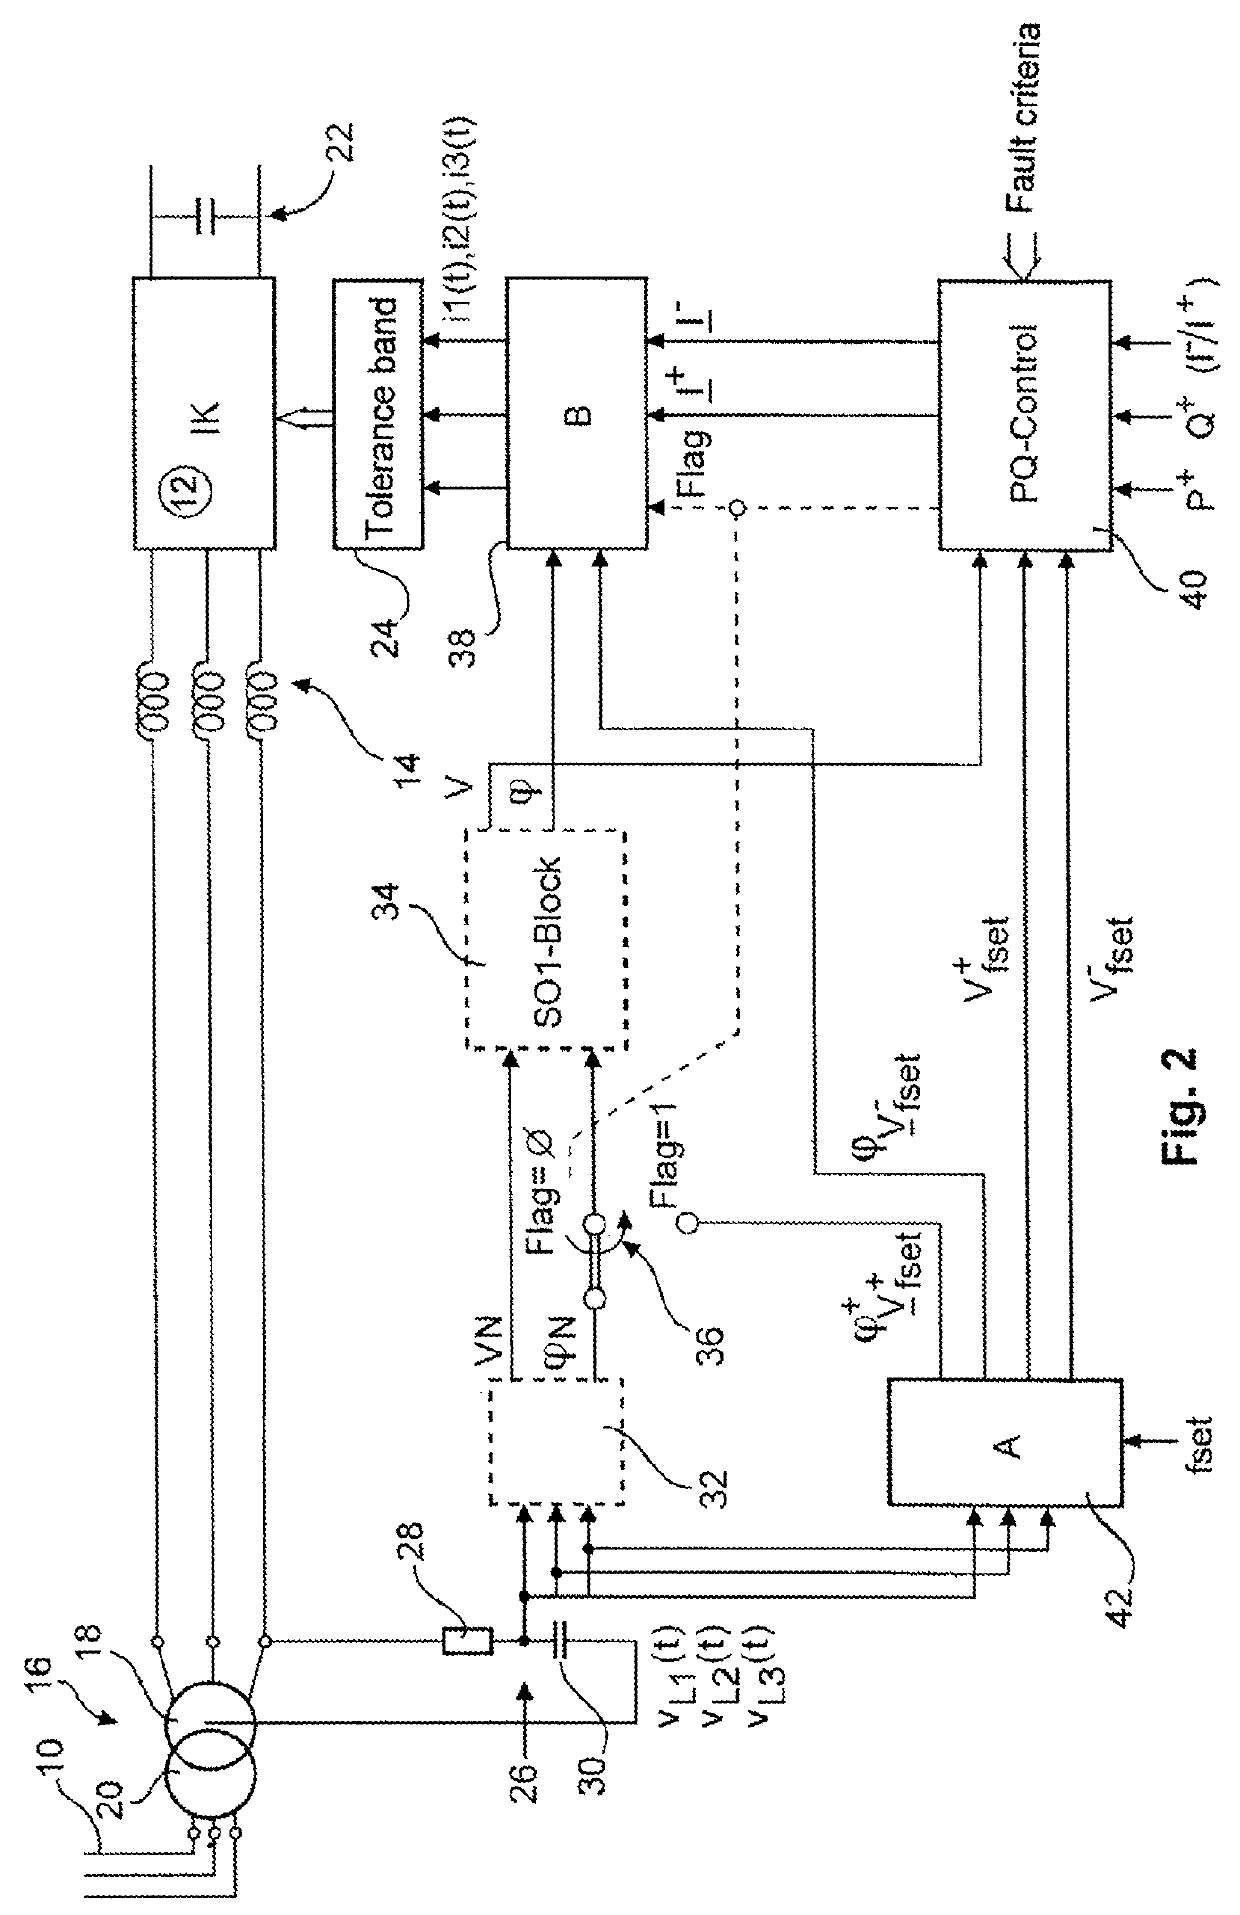 Method and apparatus for feeding electrical current into an electrical power supply system